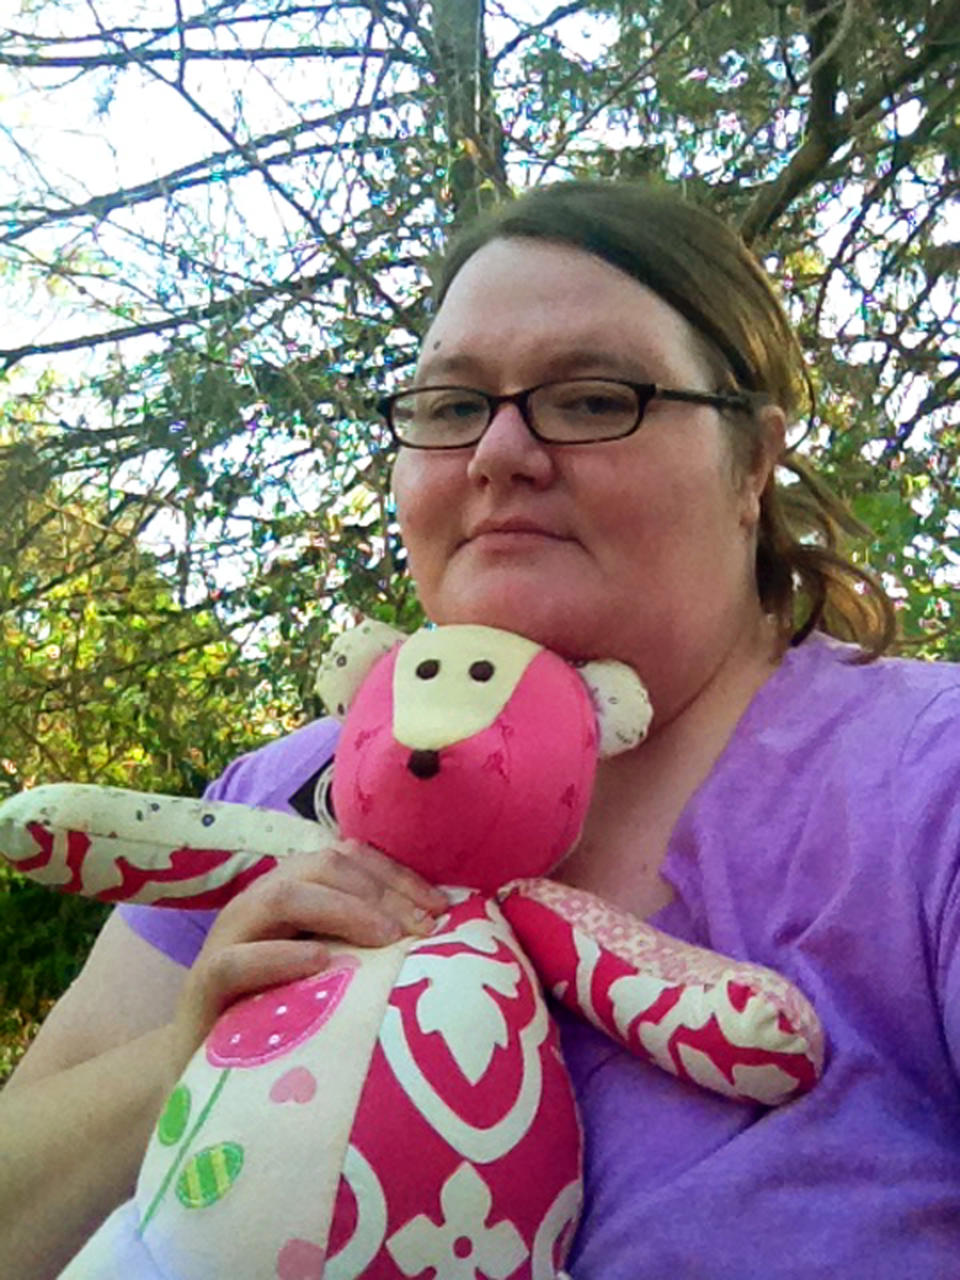 This April 2014 photo released by Kristine McCormick shows her posing in Indianapolis with a memorial teddy bear in honor of her daughter Cora, who died when she was five days old from an undetected congenital heart defect as she fed at her mother's breast on Dec. 6, 2009. (AP Photo/Kristine McCormick)